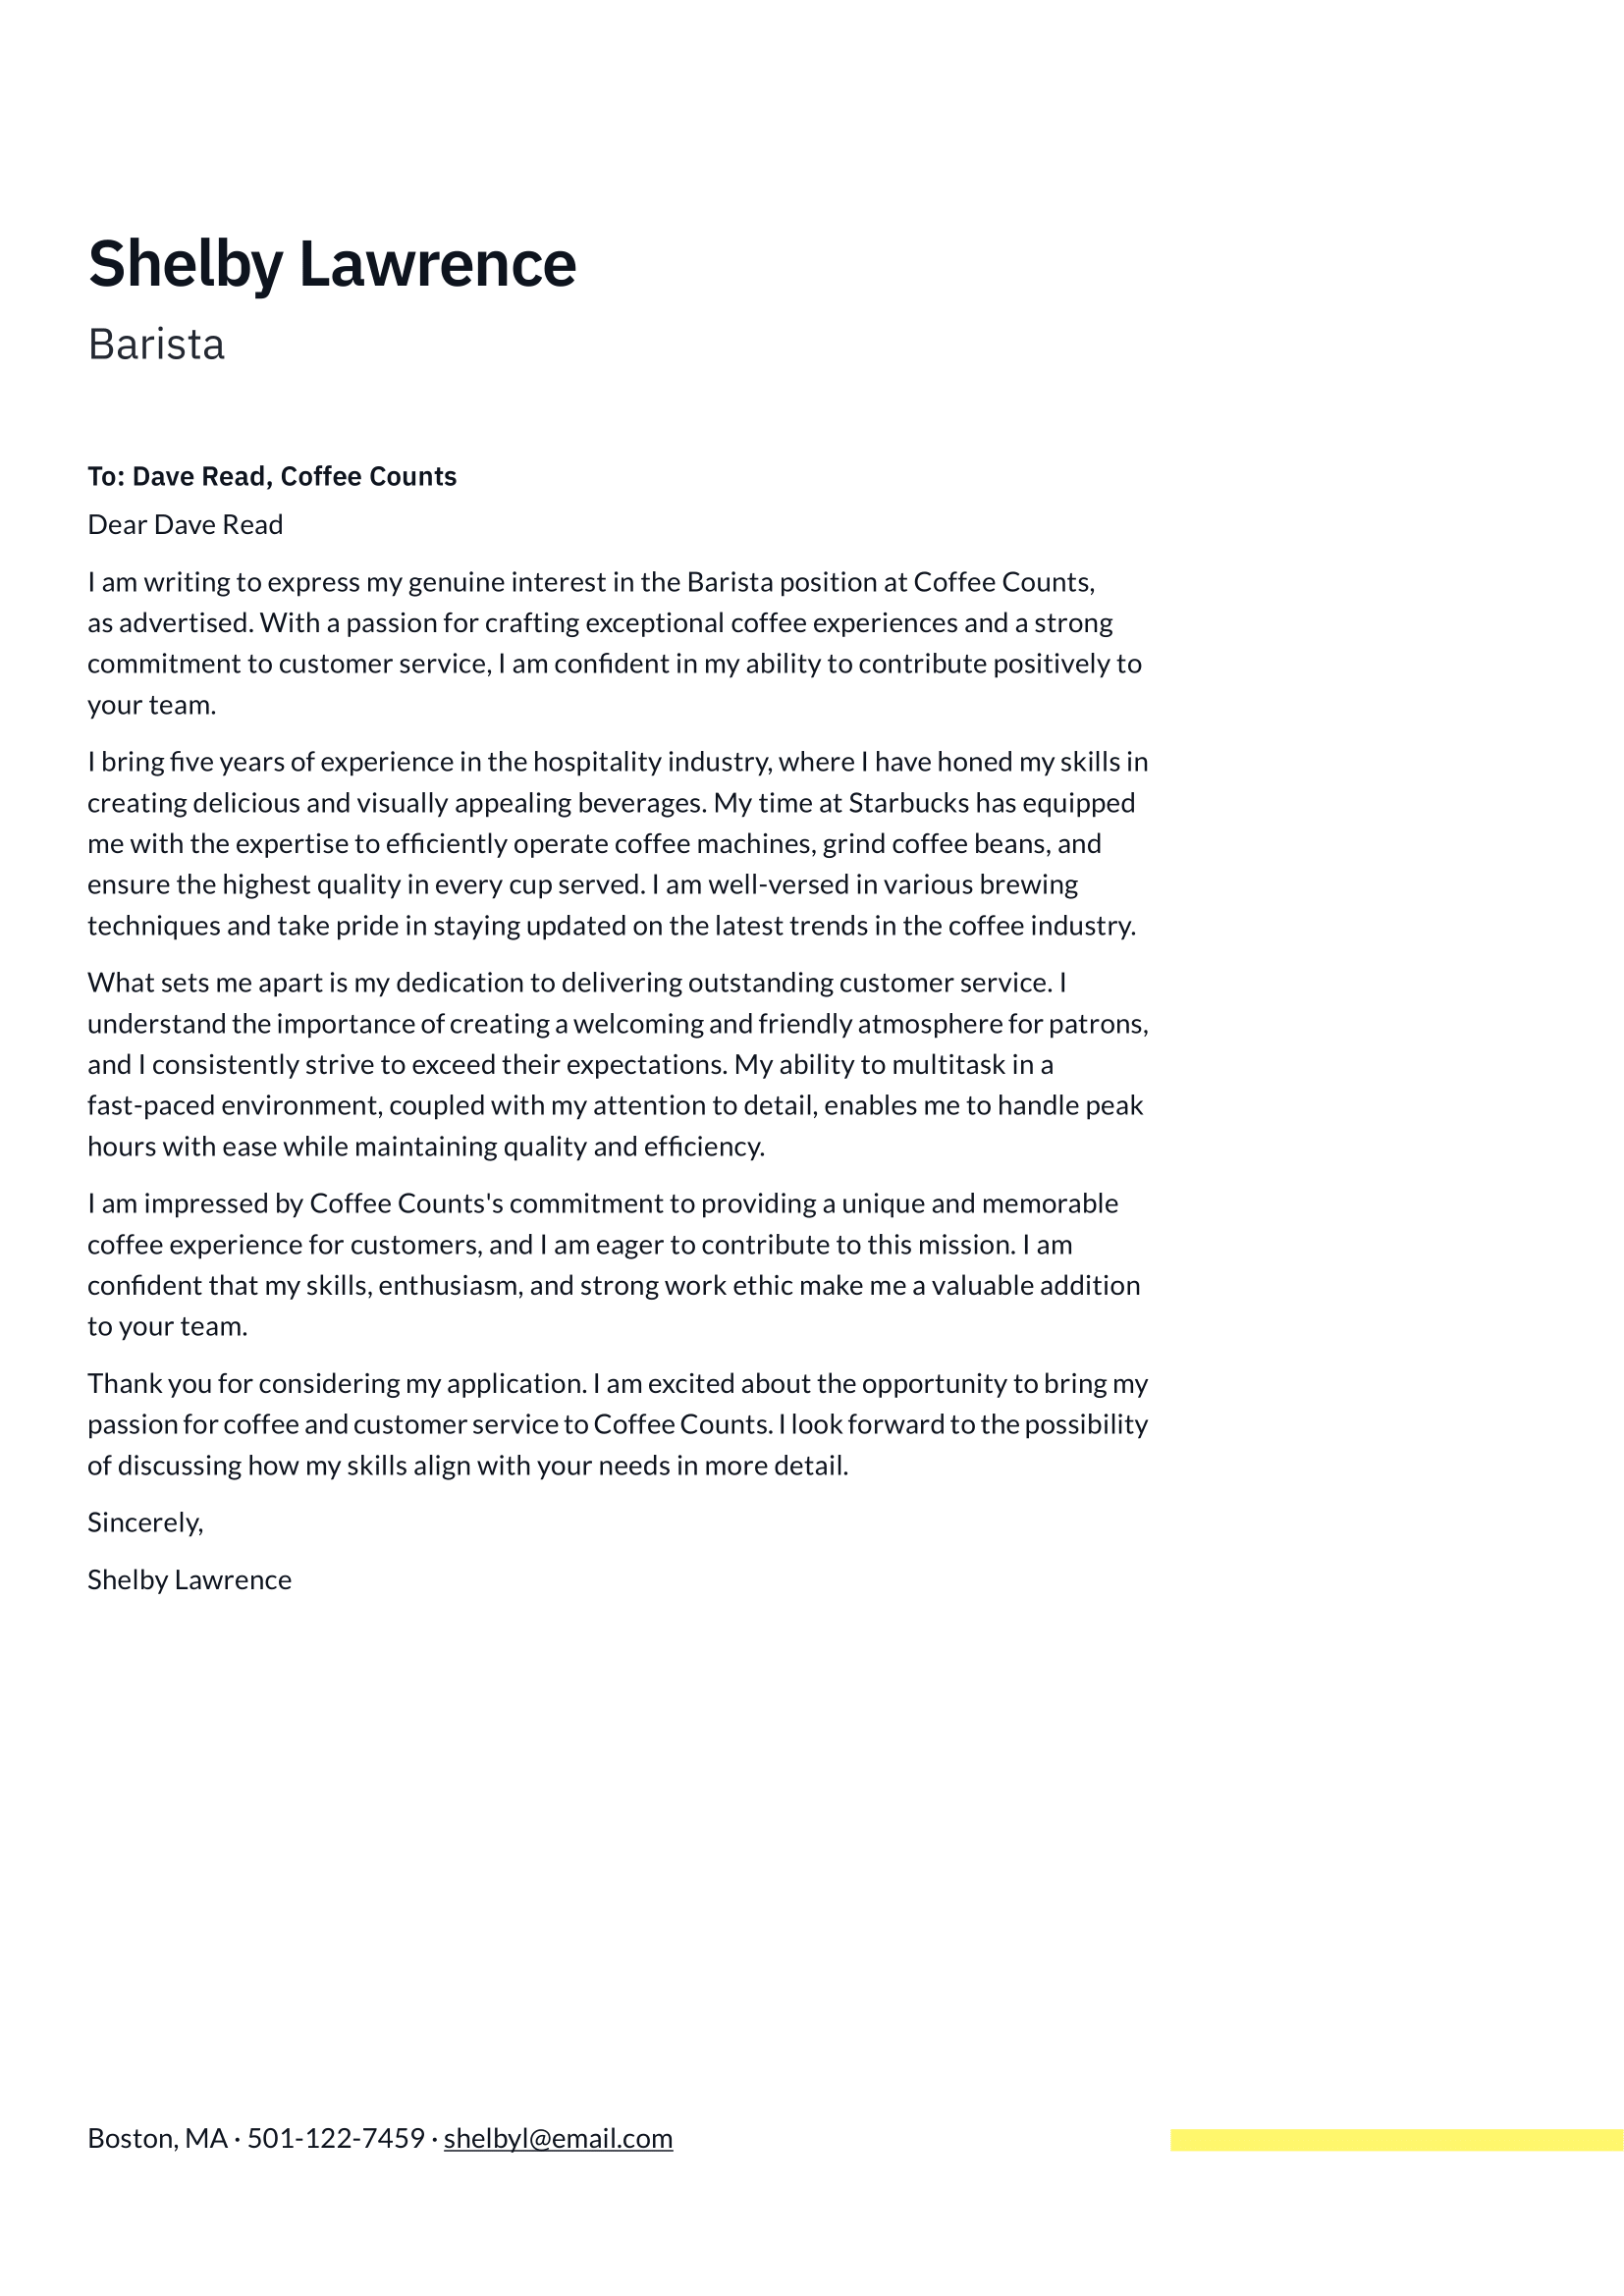 Barista Cover Letter Example & Writing Guide